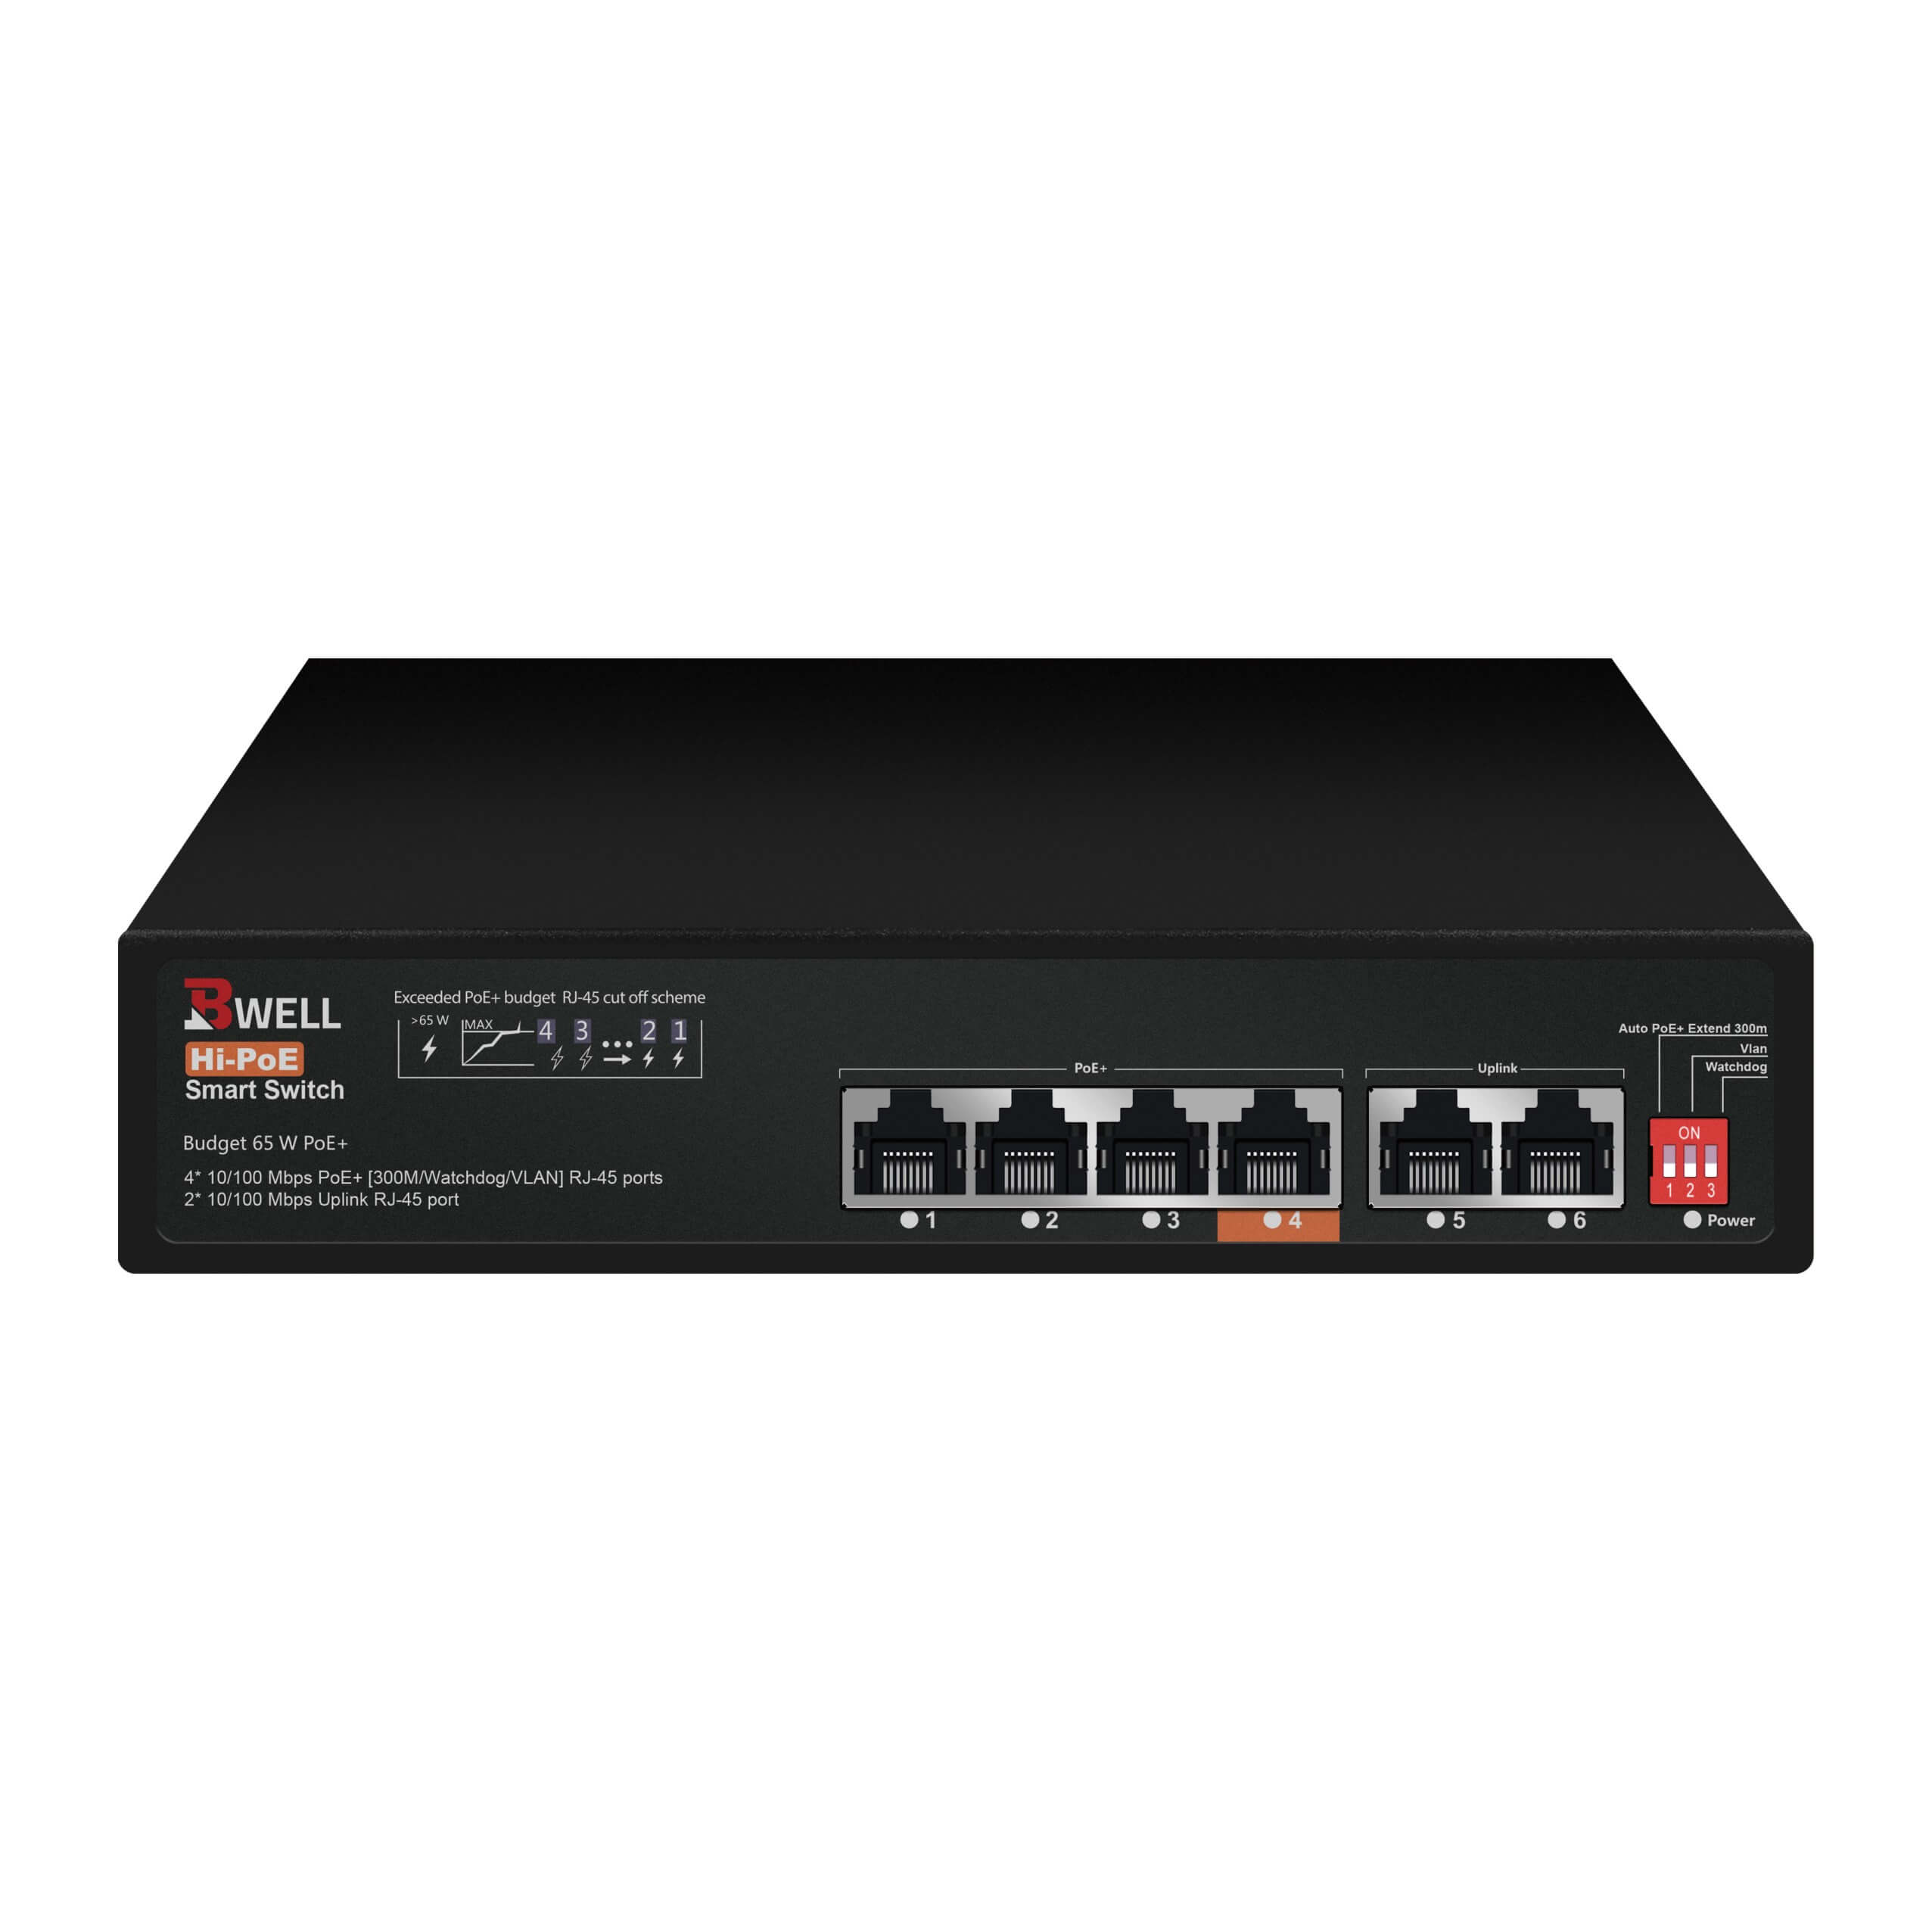 4 Port PoE Switch at 10/100 speed + 2 ports for connectivity